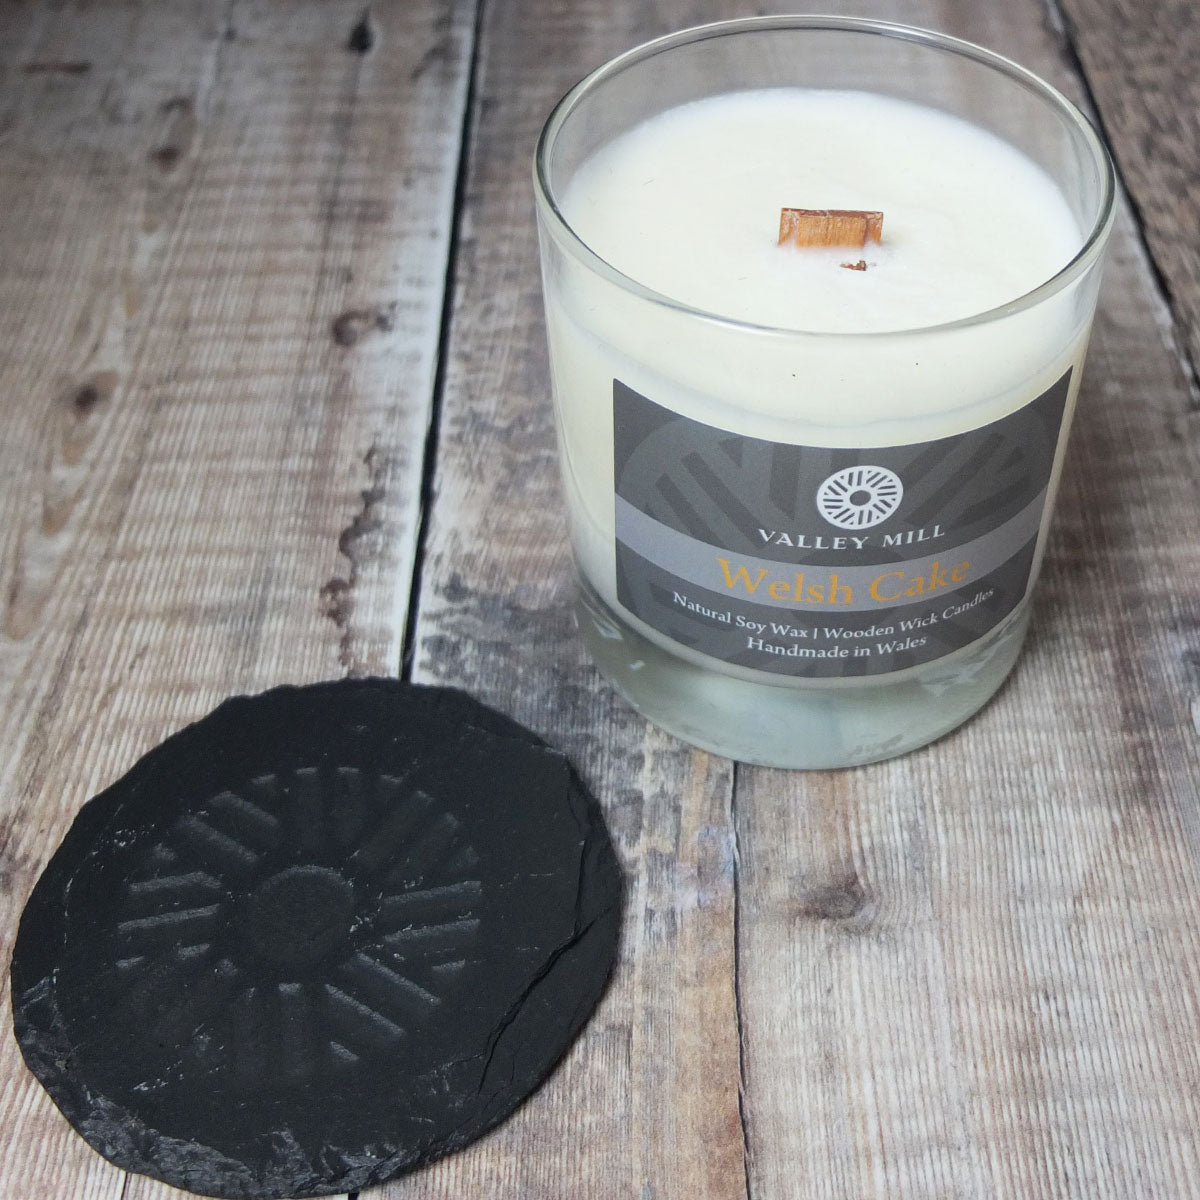 Valley Mill Welsh Cake Candle